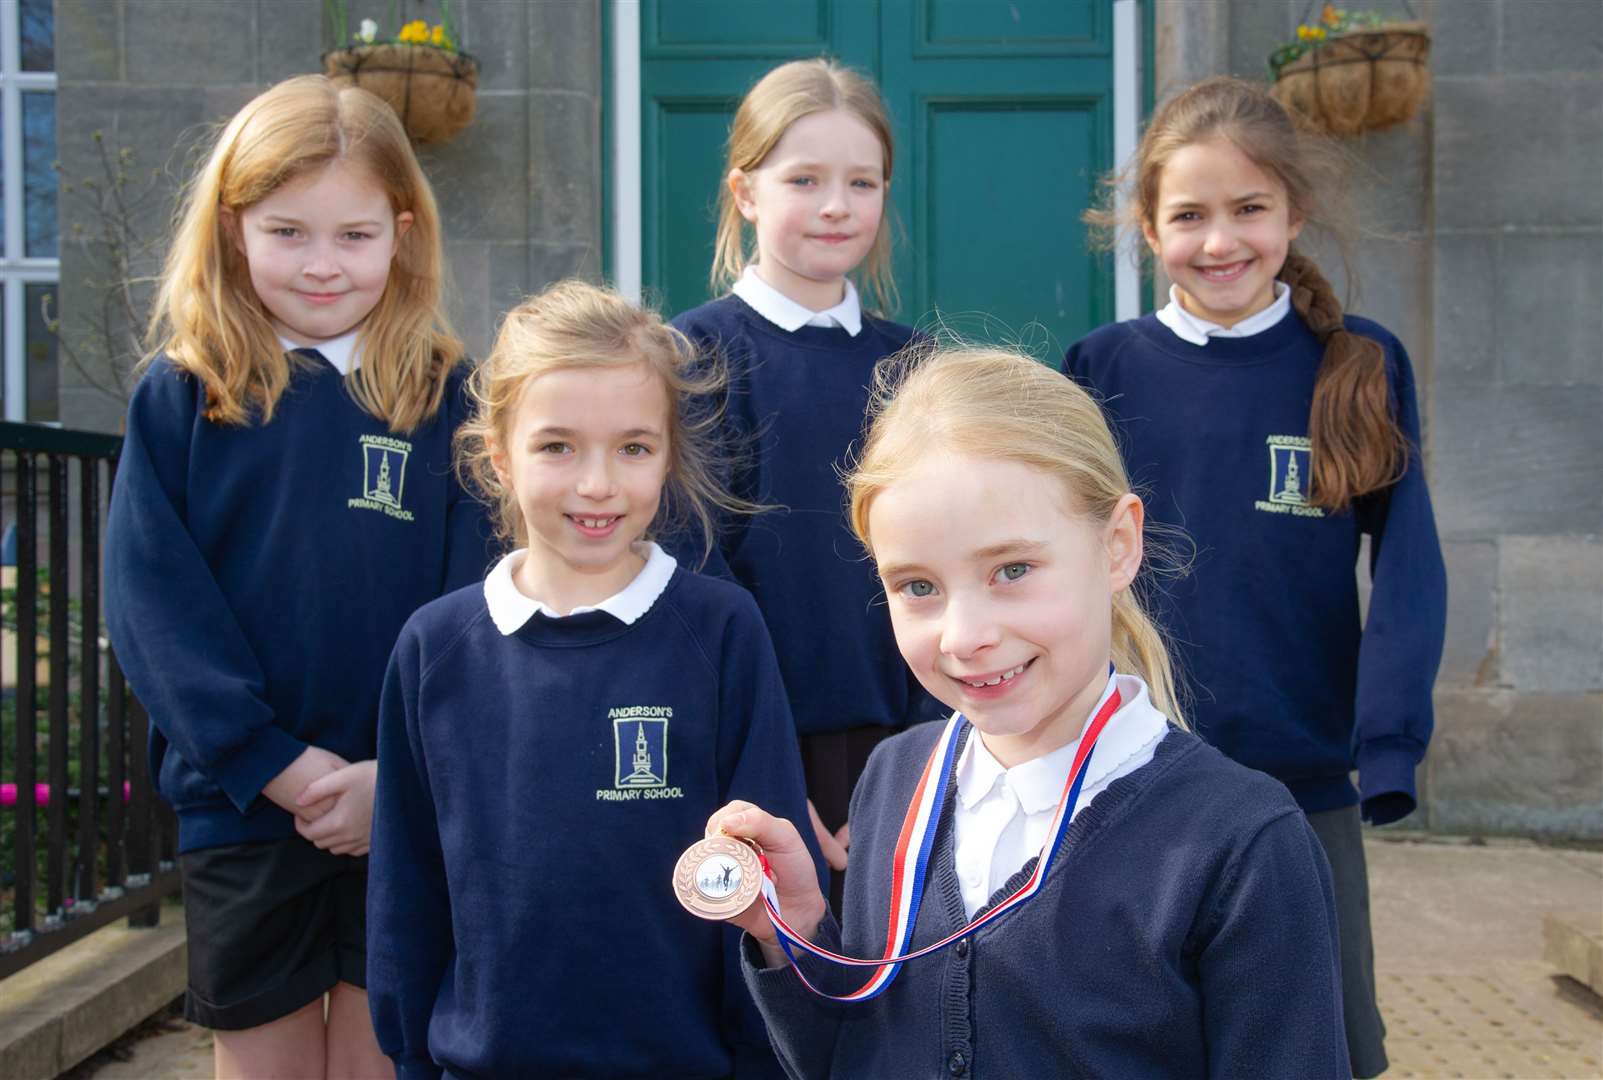 Anderson's P4/5 Girls came 2nd in the Moray Schools Cross Country event.